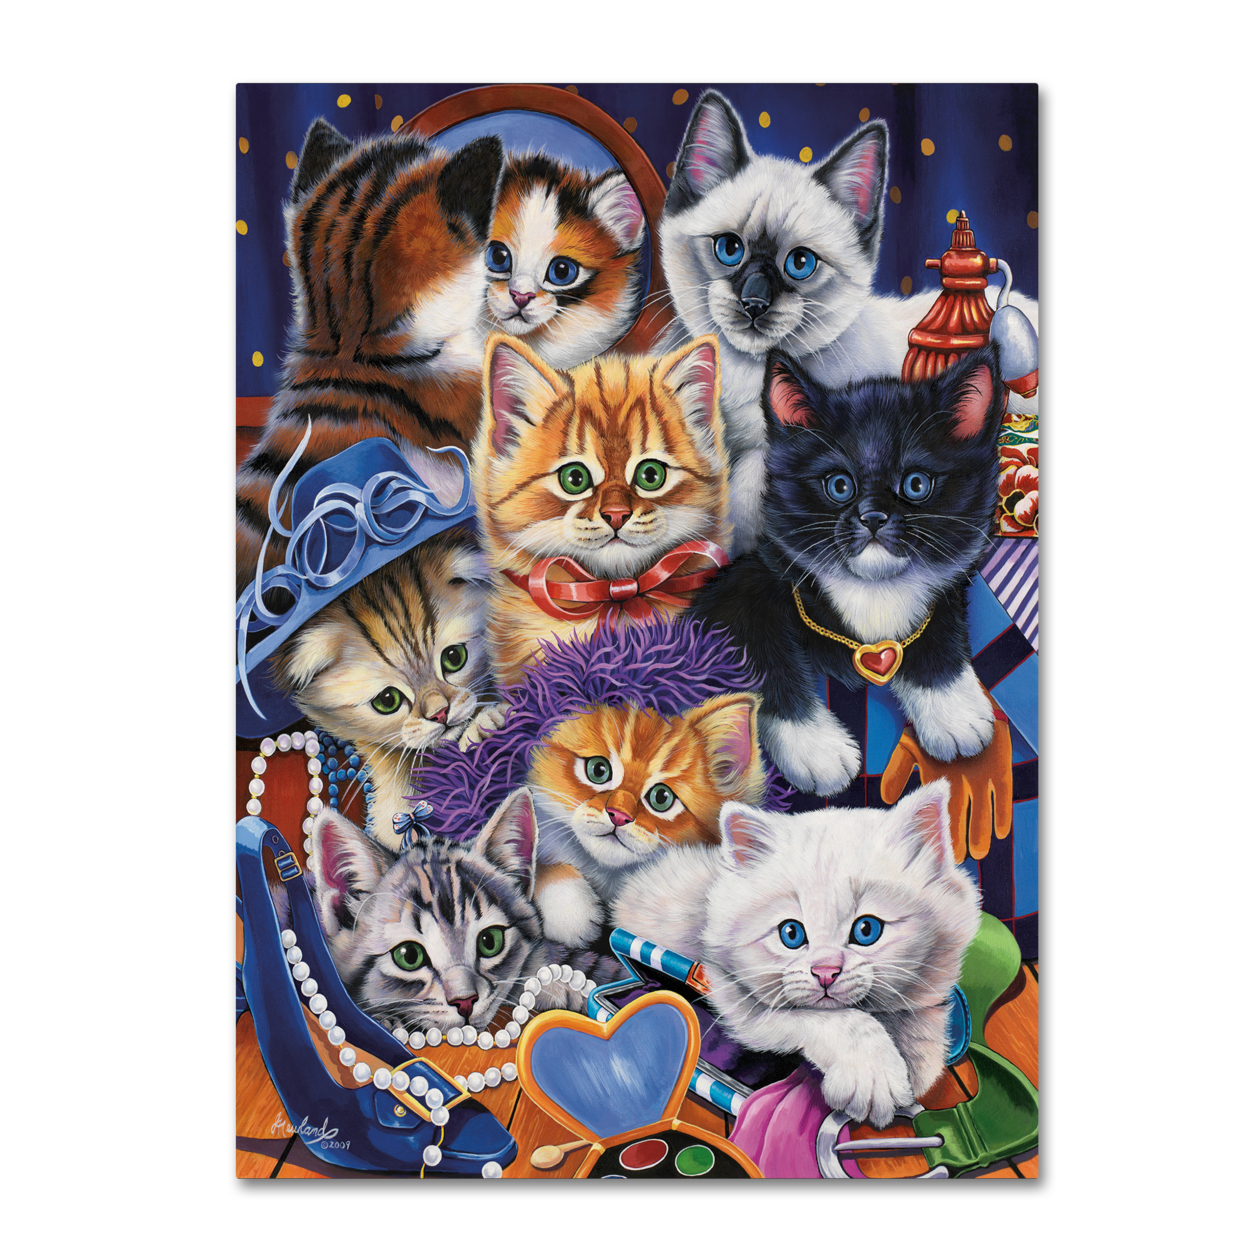 Jenny Newland 'Kittens In Closet' Canvas Wall Art 35 X 47 Inches